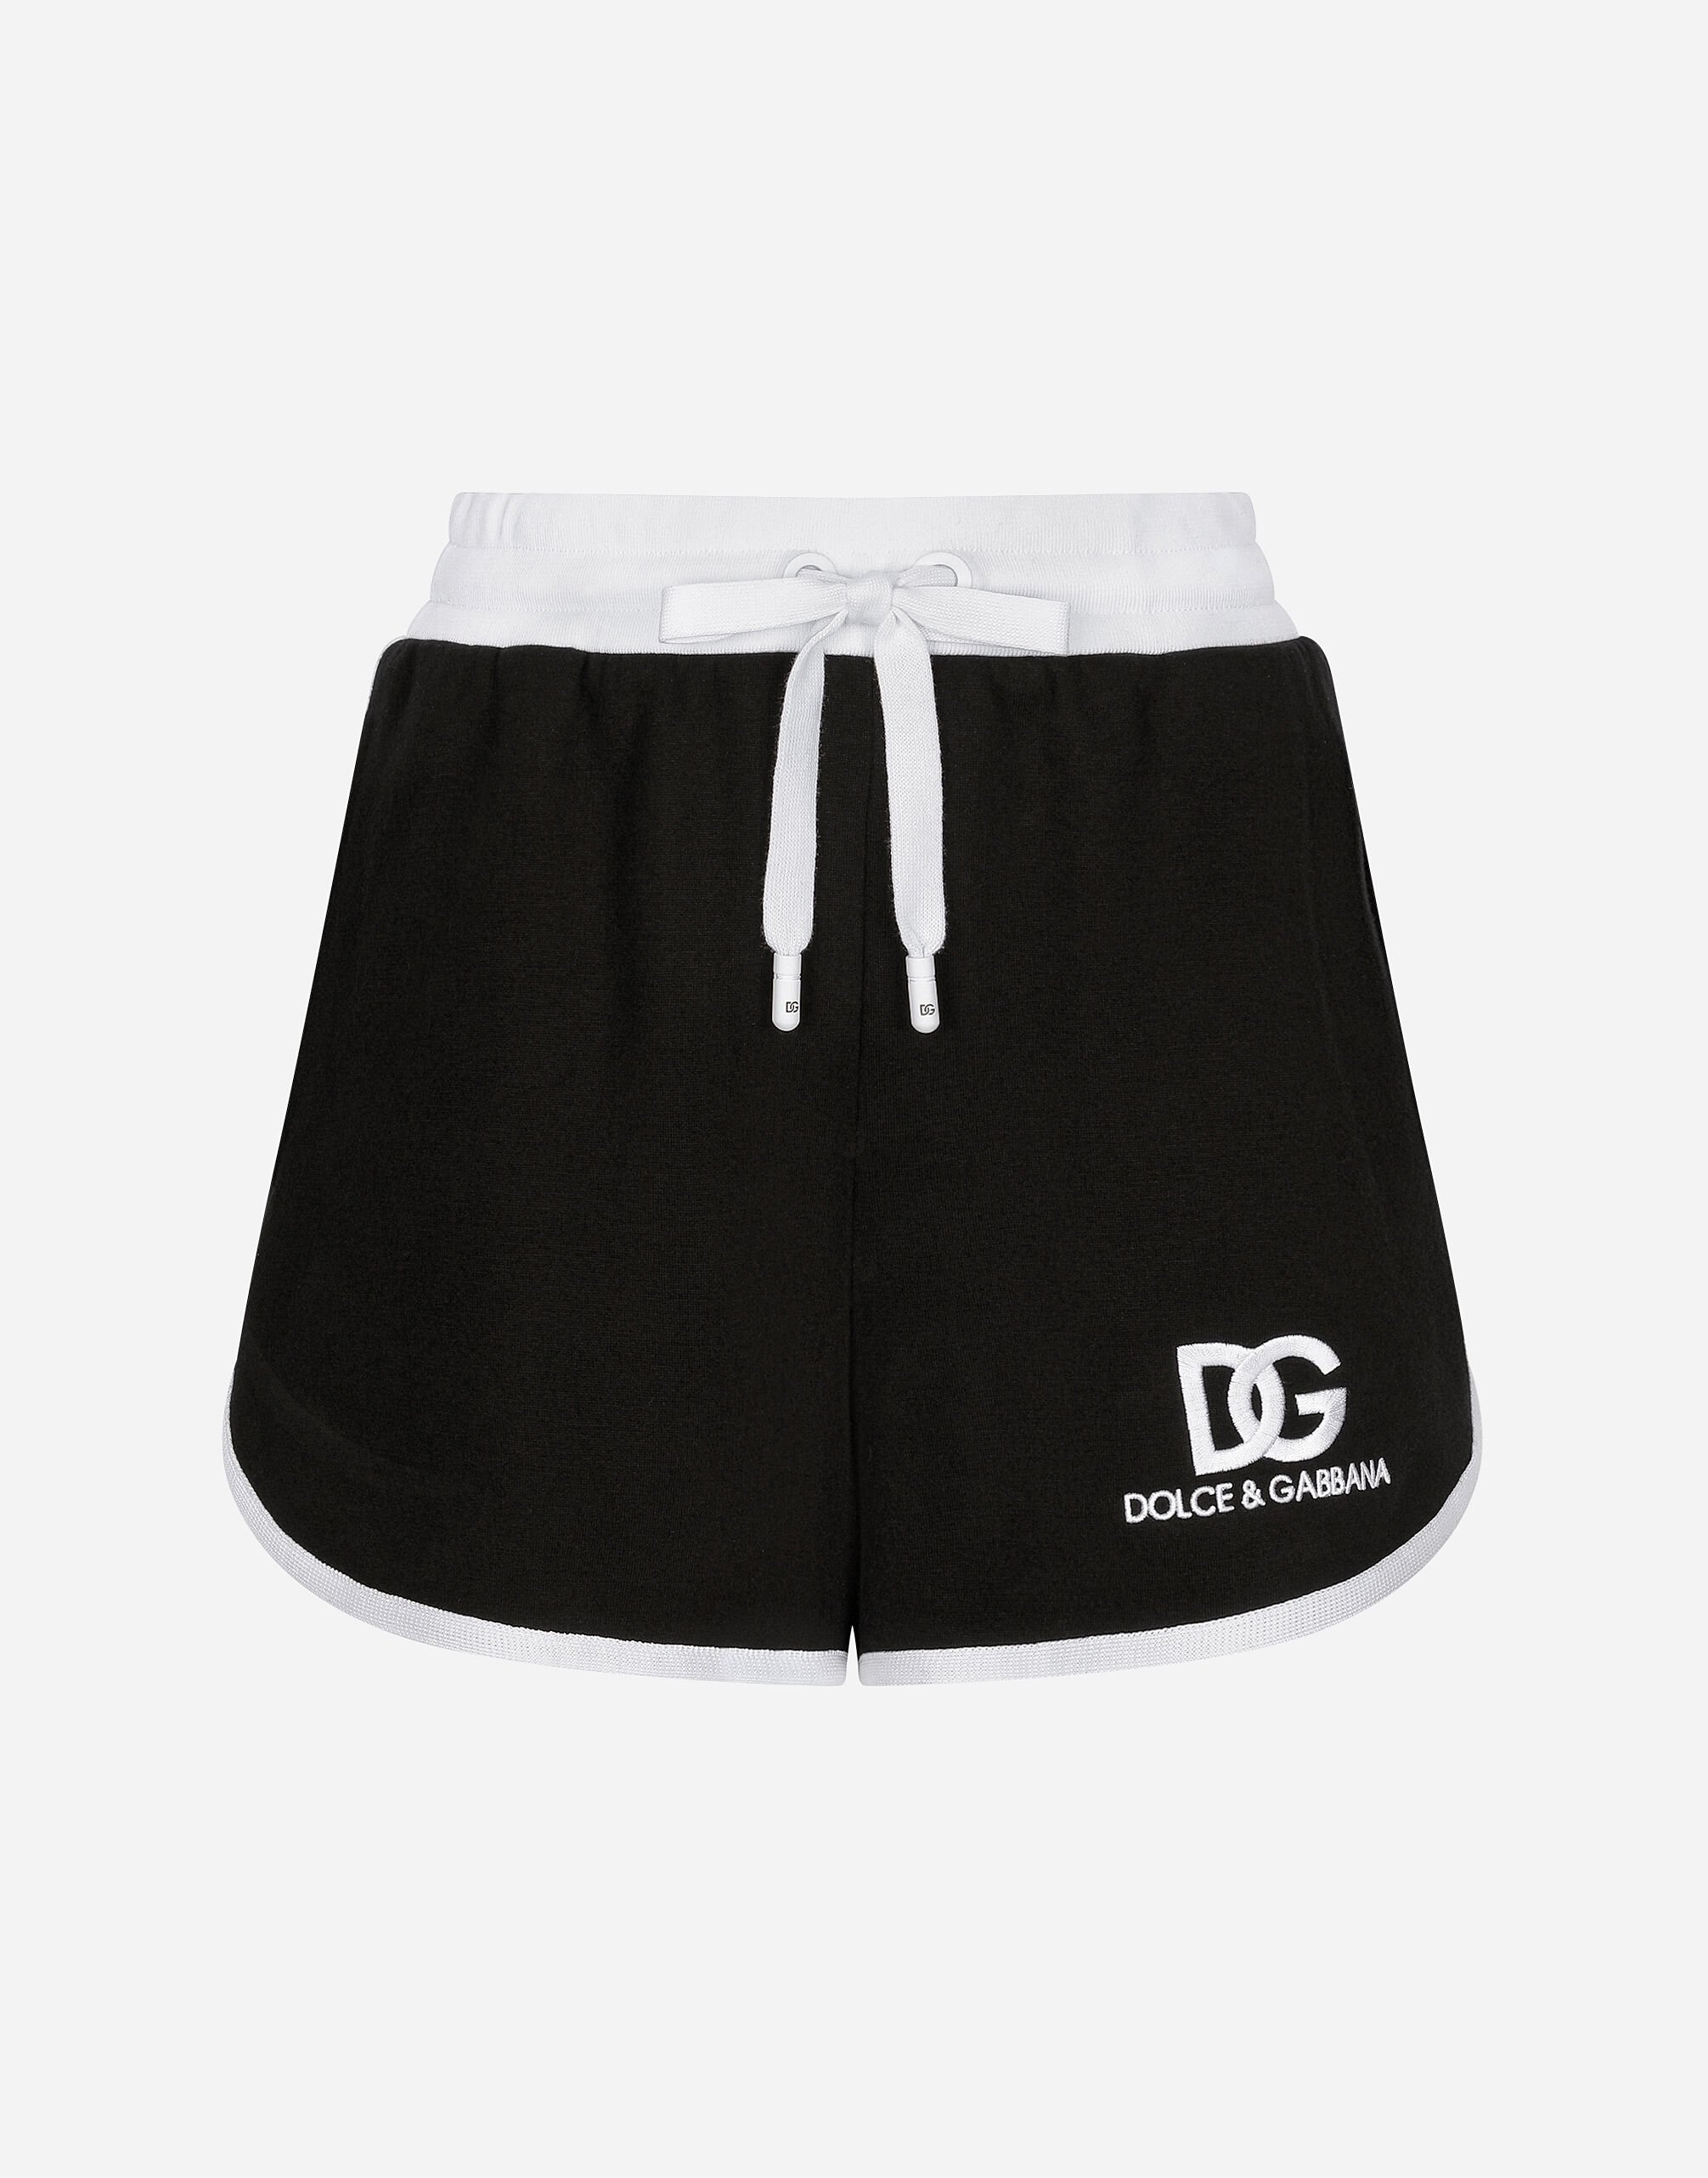 Dolce & Gabbana Jersey shorts with DG logo embroidery Gold BB7287AY828